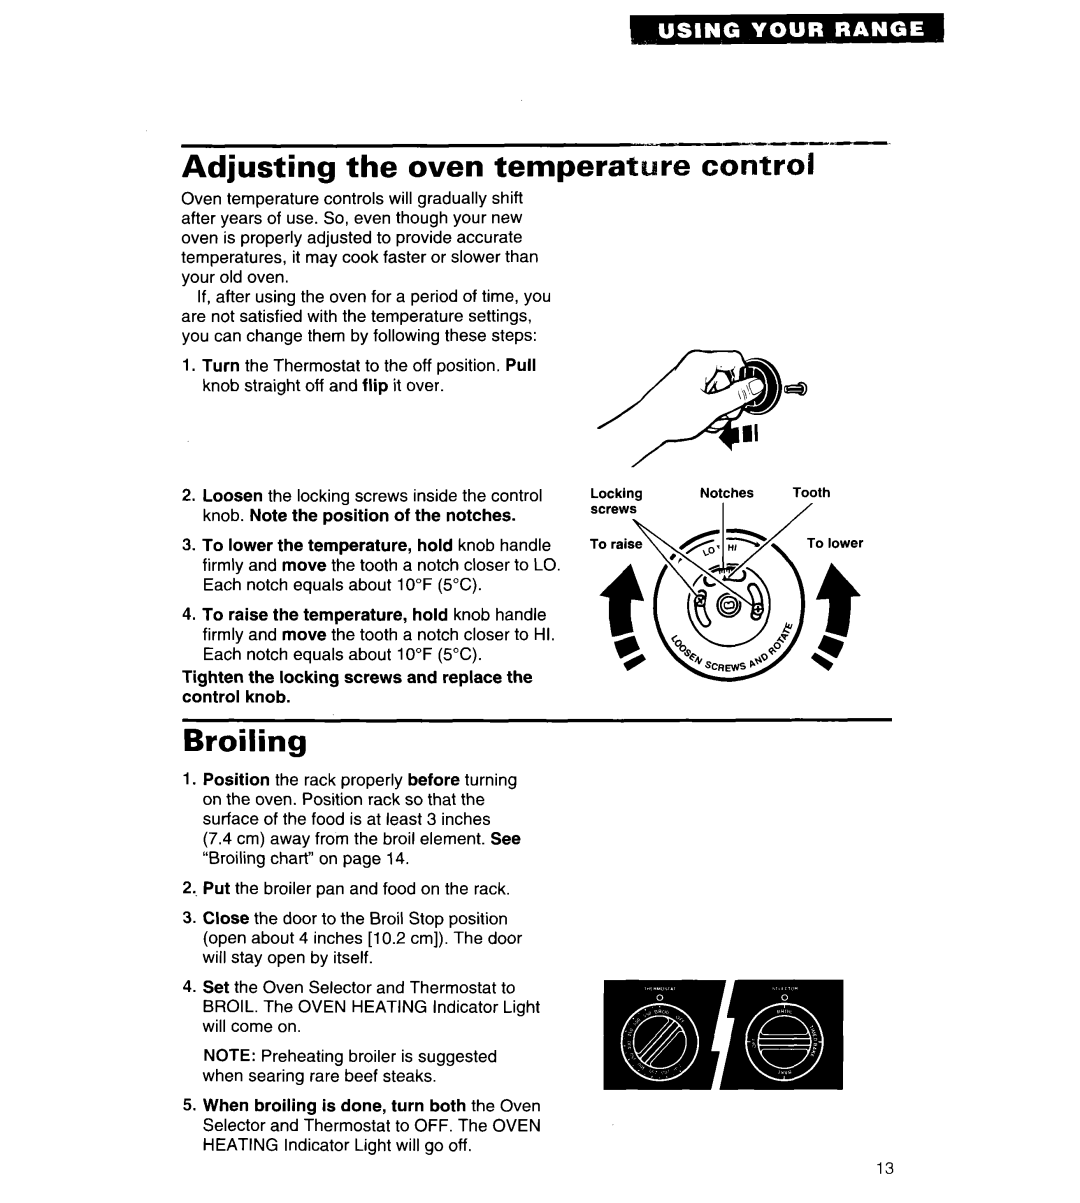 Whirlpool RS313PXY important safety instructions Adjusting the oven temperat re control, Broiling 